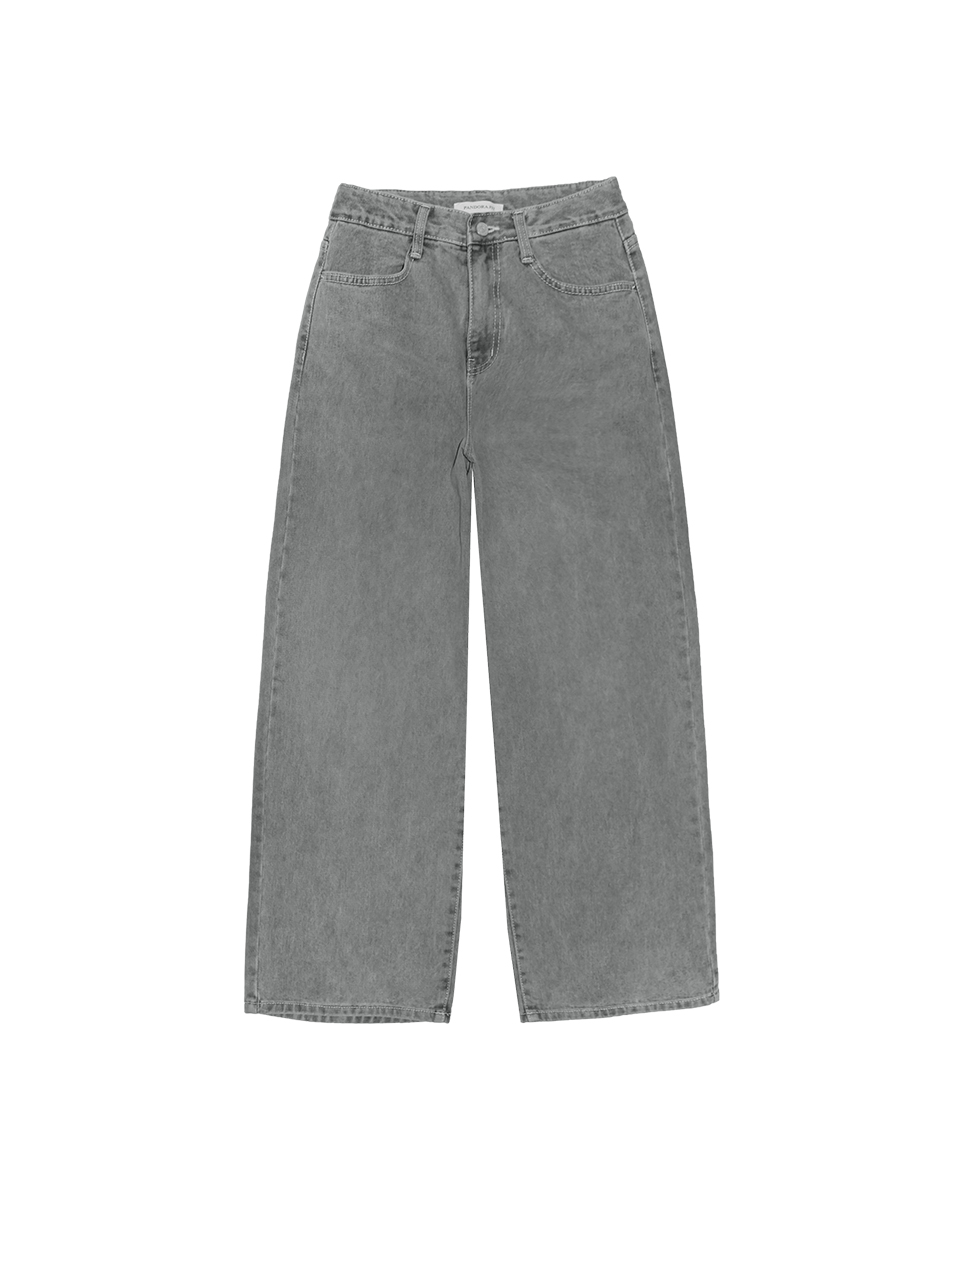 [WIDE] Adrian String Jeans